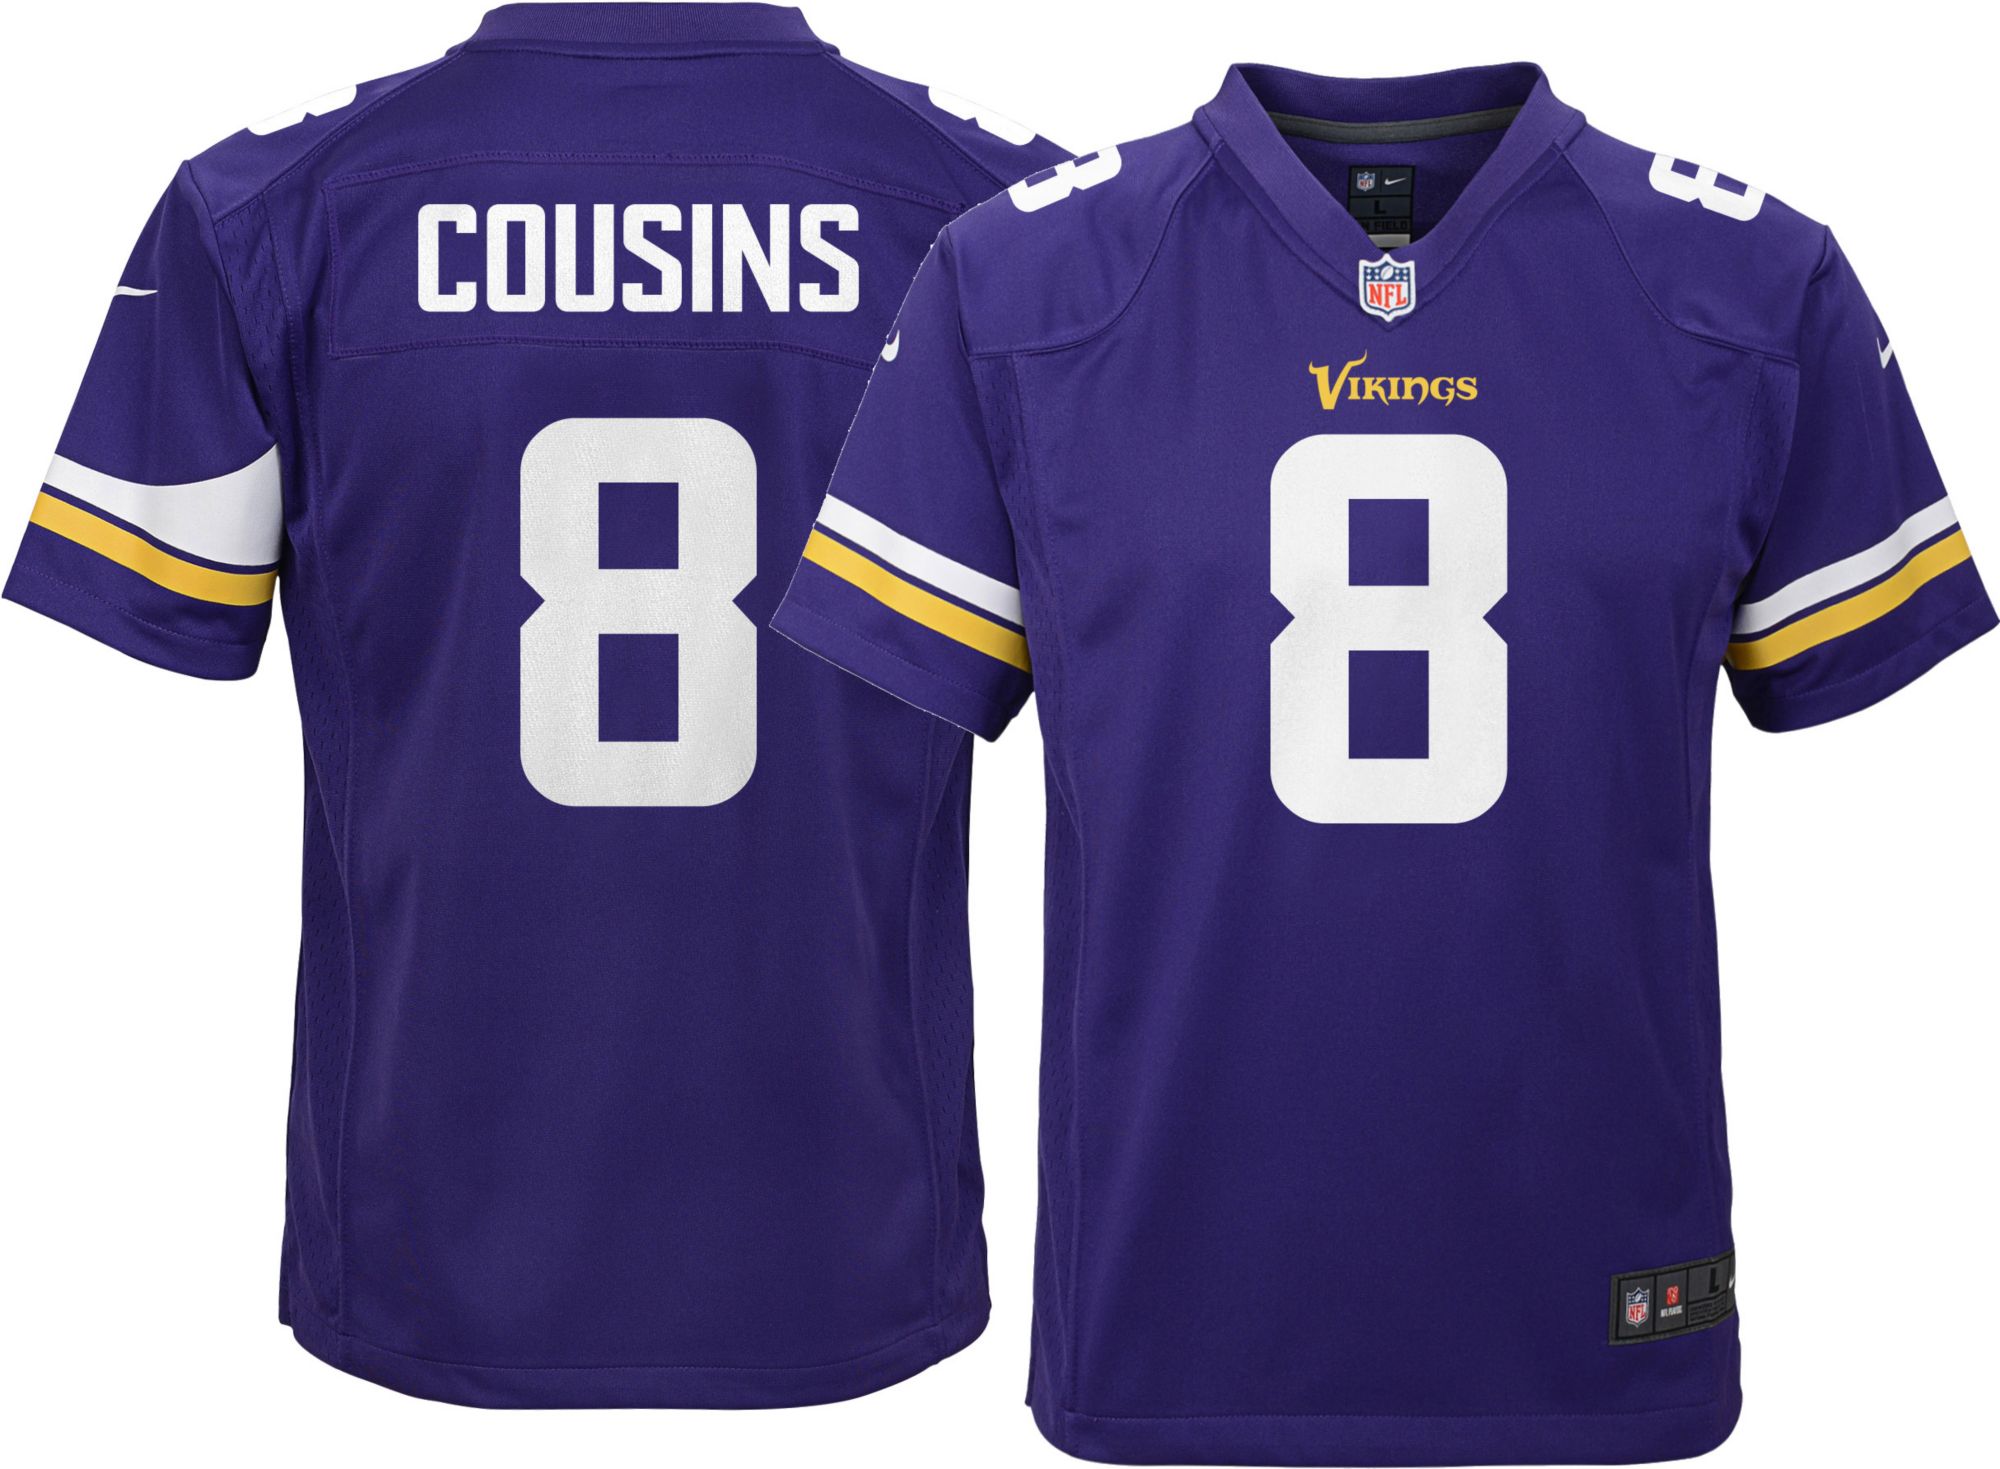 kirk cousins youth jersey